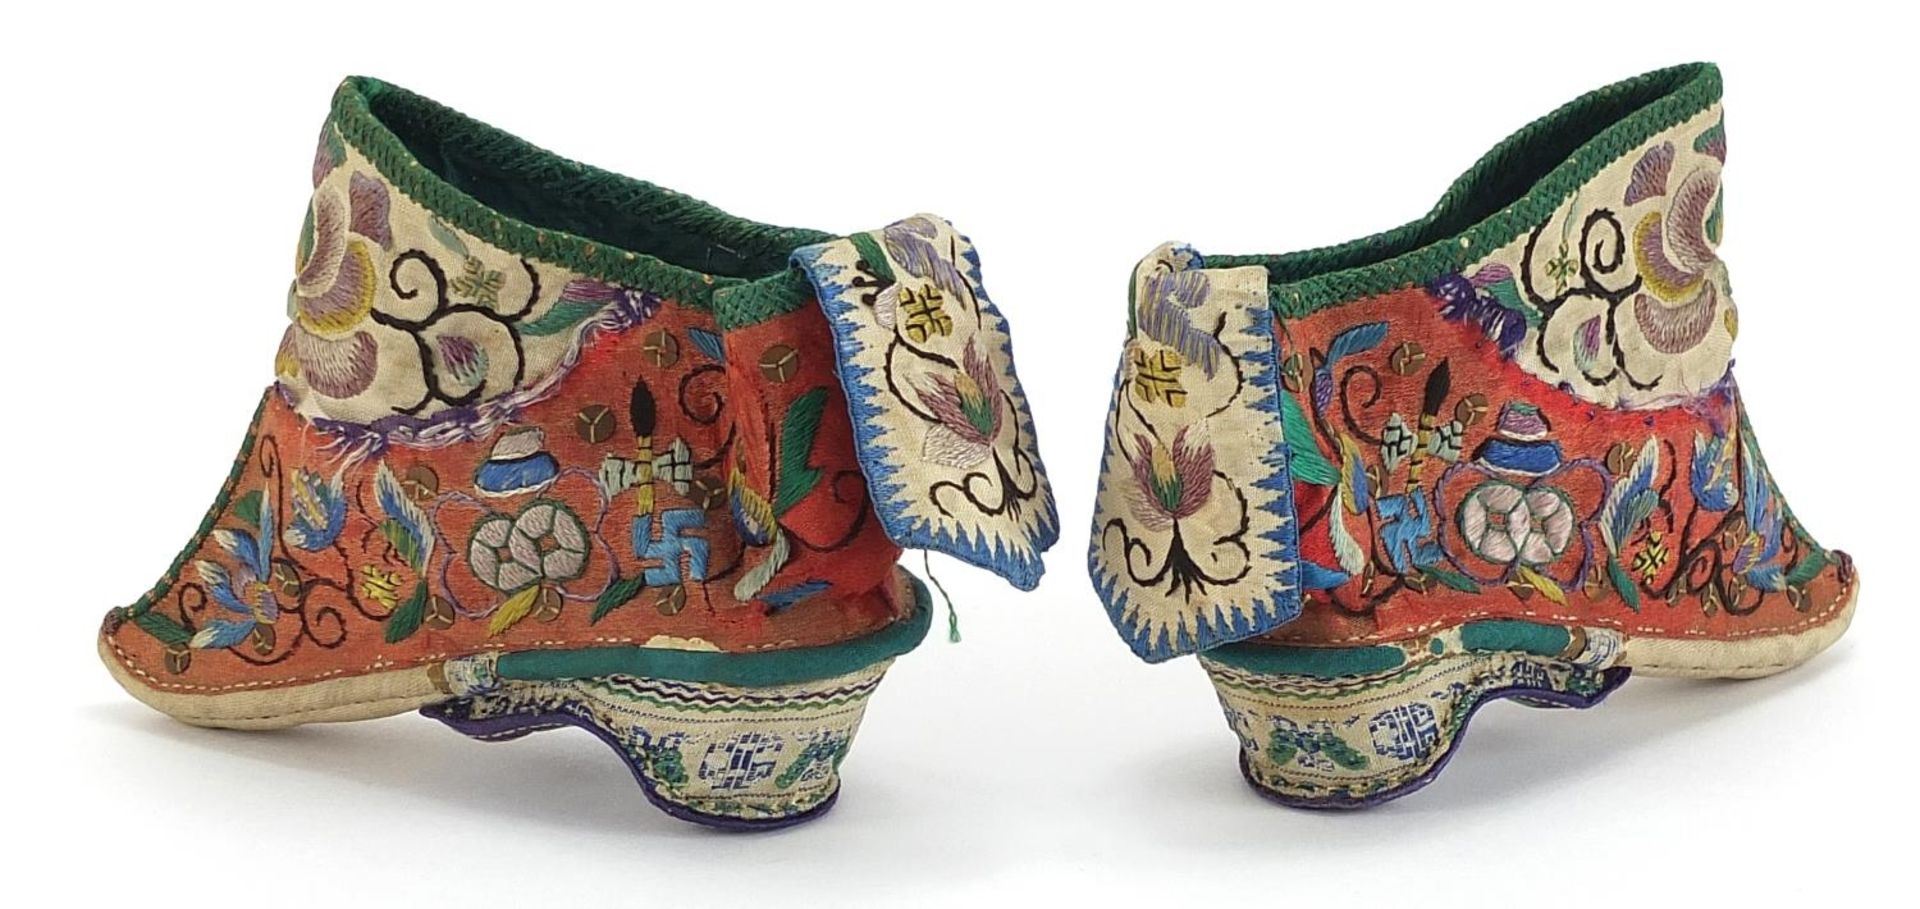 Pair of Chinese silk lotus shoes embroidered with flowers, each 11cm in length - Image 2 of 3